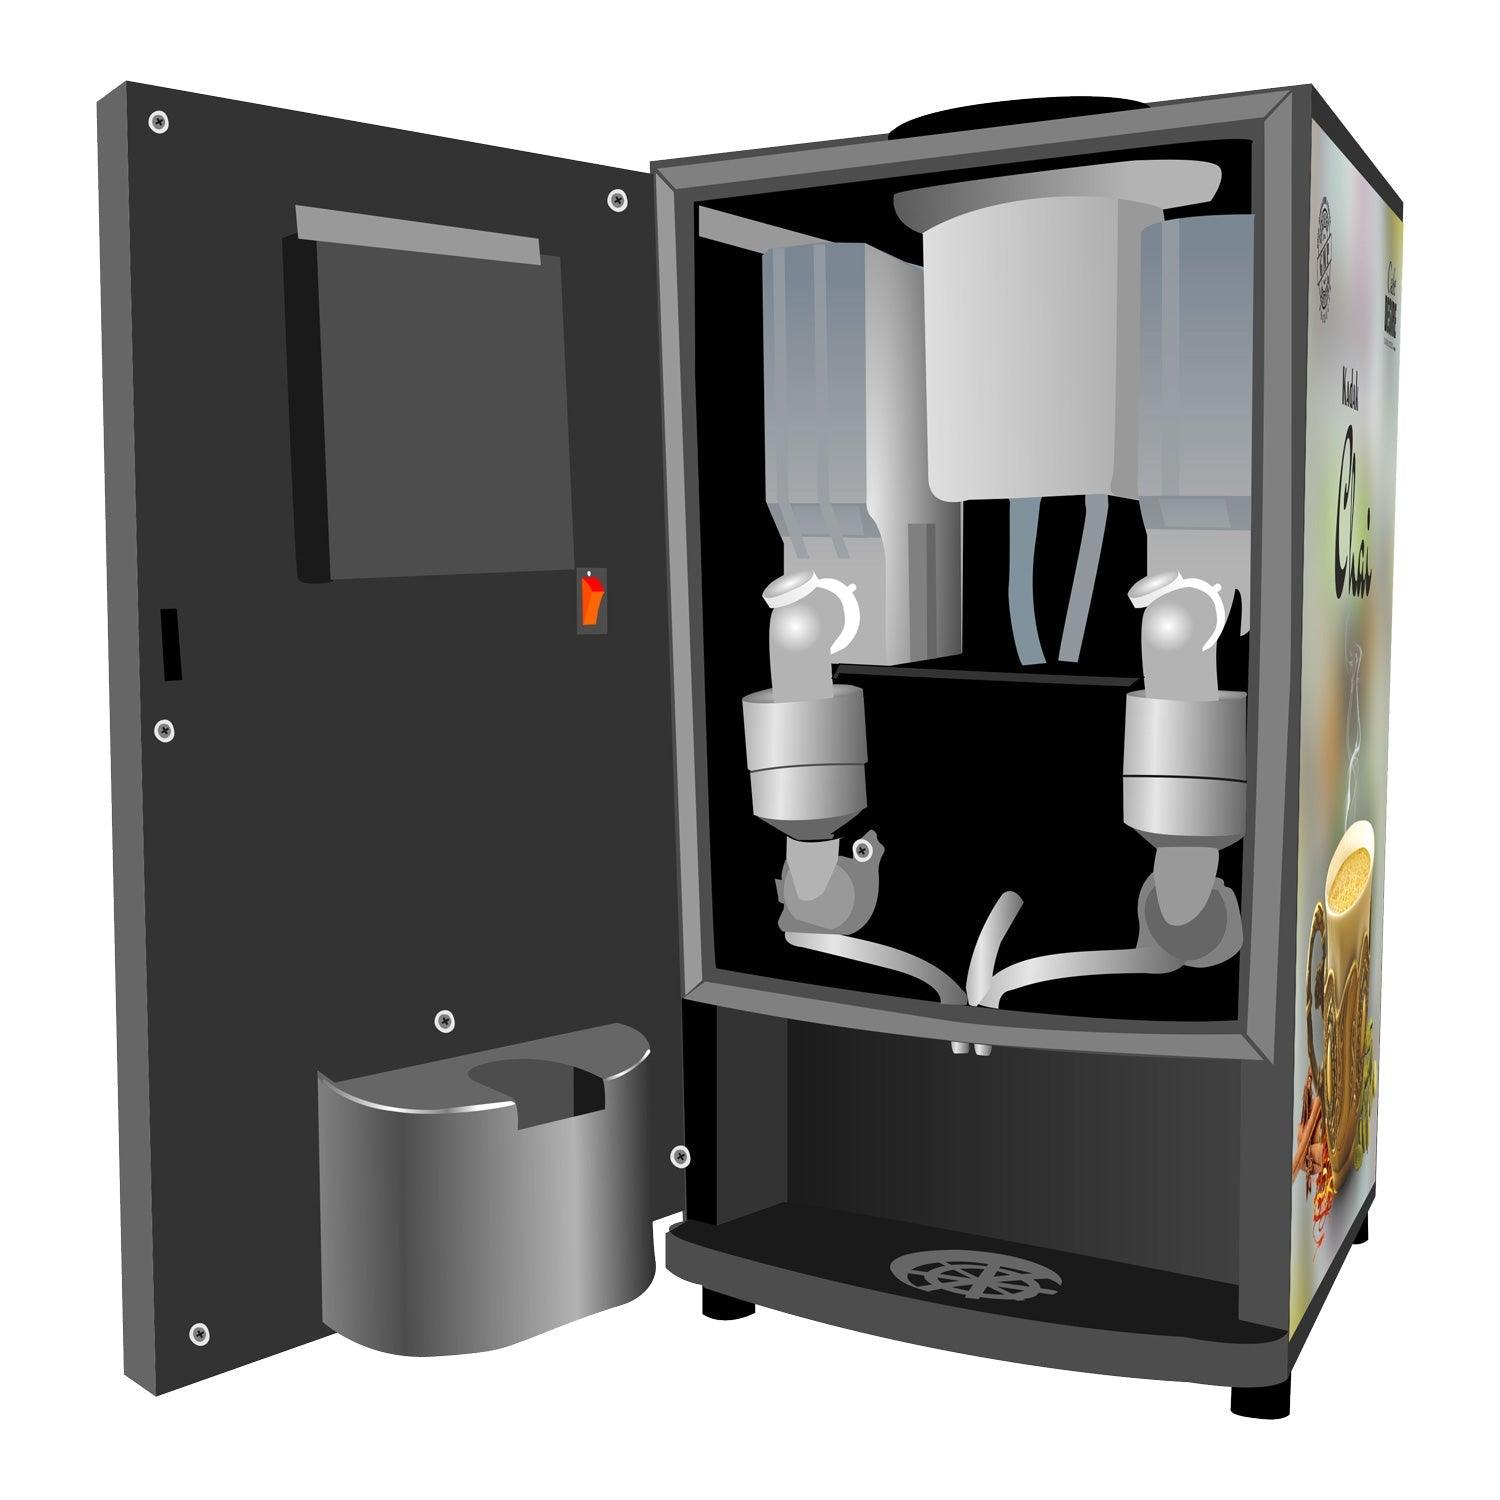 Online Option - RO Direct Water Inlet - Coffee Tea Vending Machine - 2 Lane | Two Beverage Options | Fully Automatic Tea & Coffee Vending Machine | For Offices, Shops and Smart Homes | Make 2 Varieties of Coffee Tea with Premix - cd-usa.com